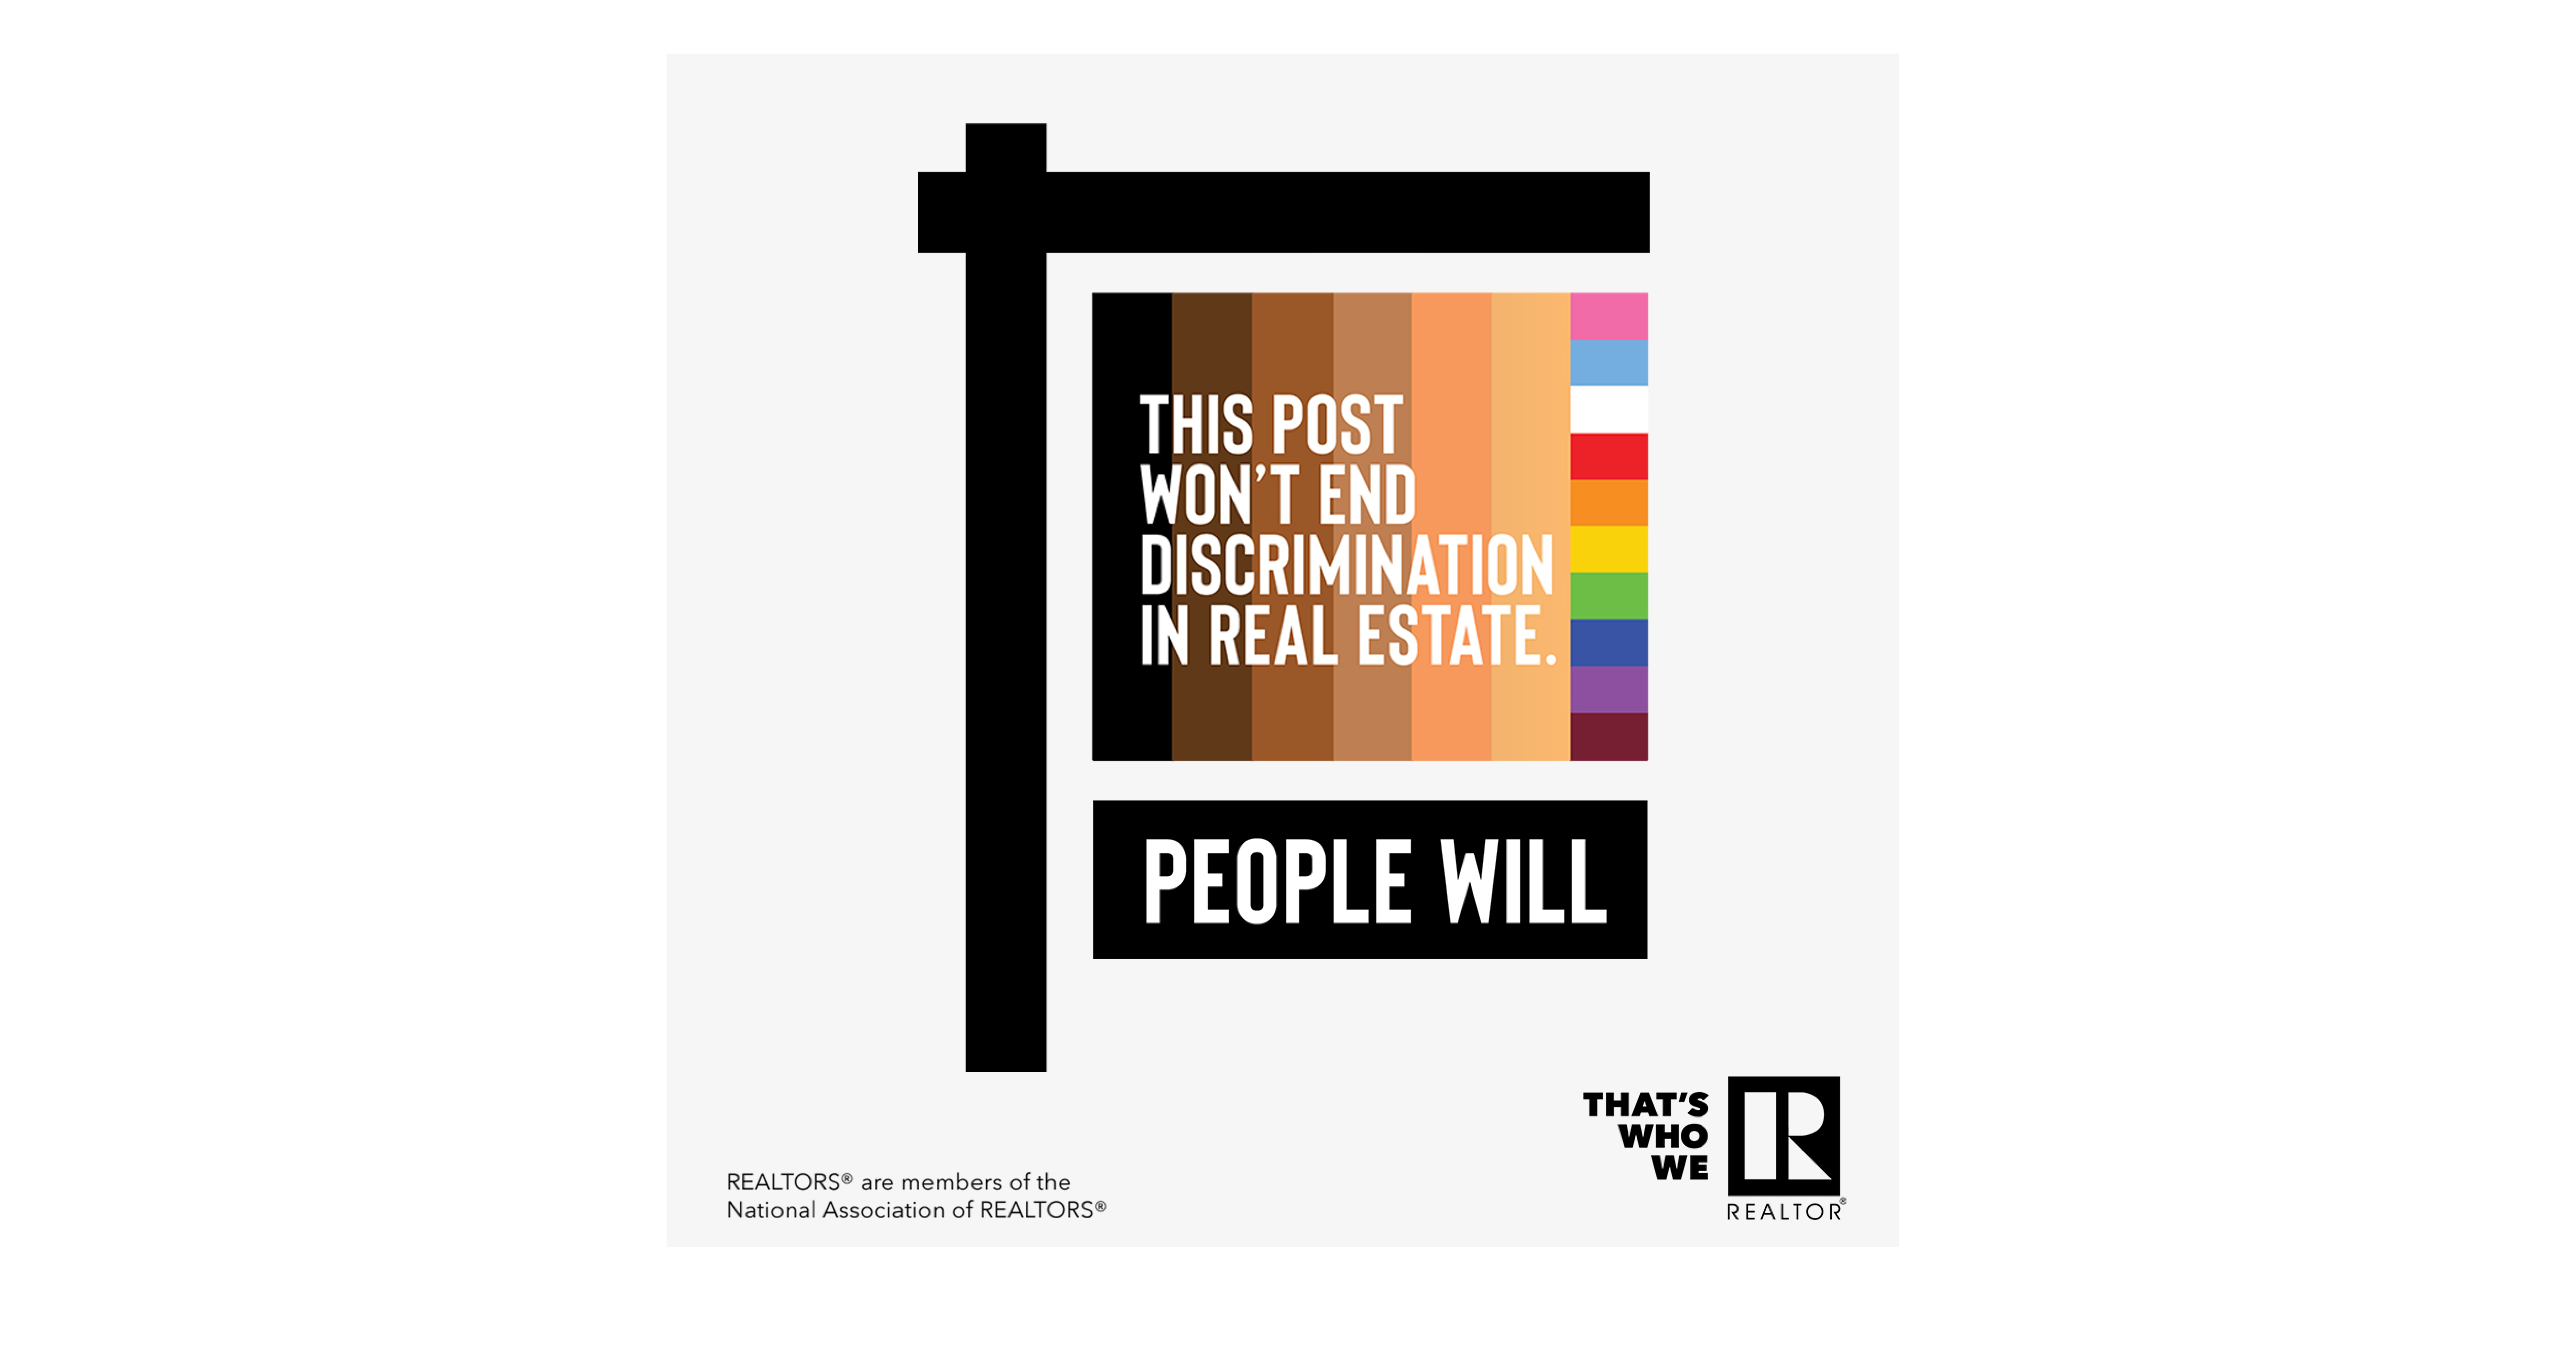 NARs and IVRs campaign to prevent housing discrimination